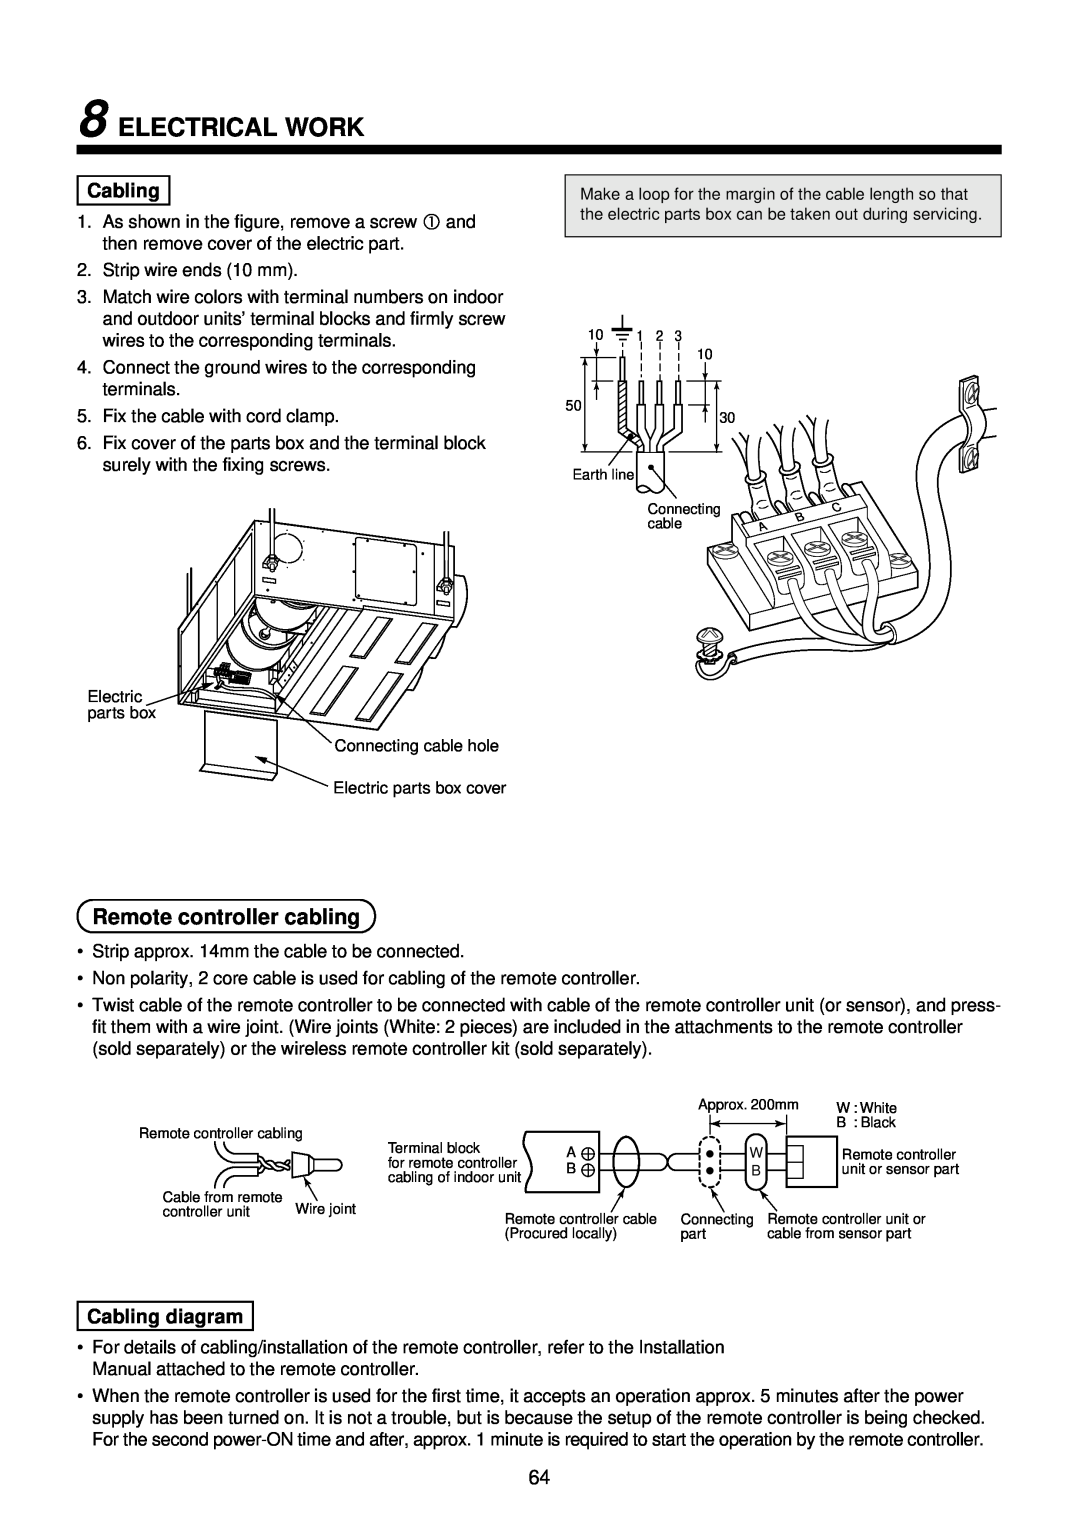 Toshiba R410A service manual Electrical Work, Remote controller cabling, Cabling diagram 